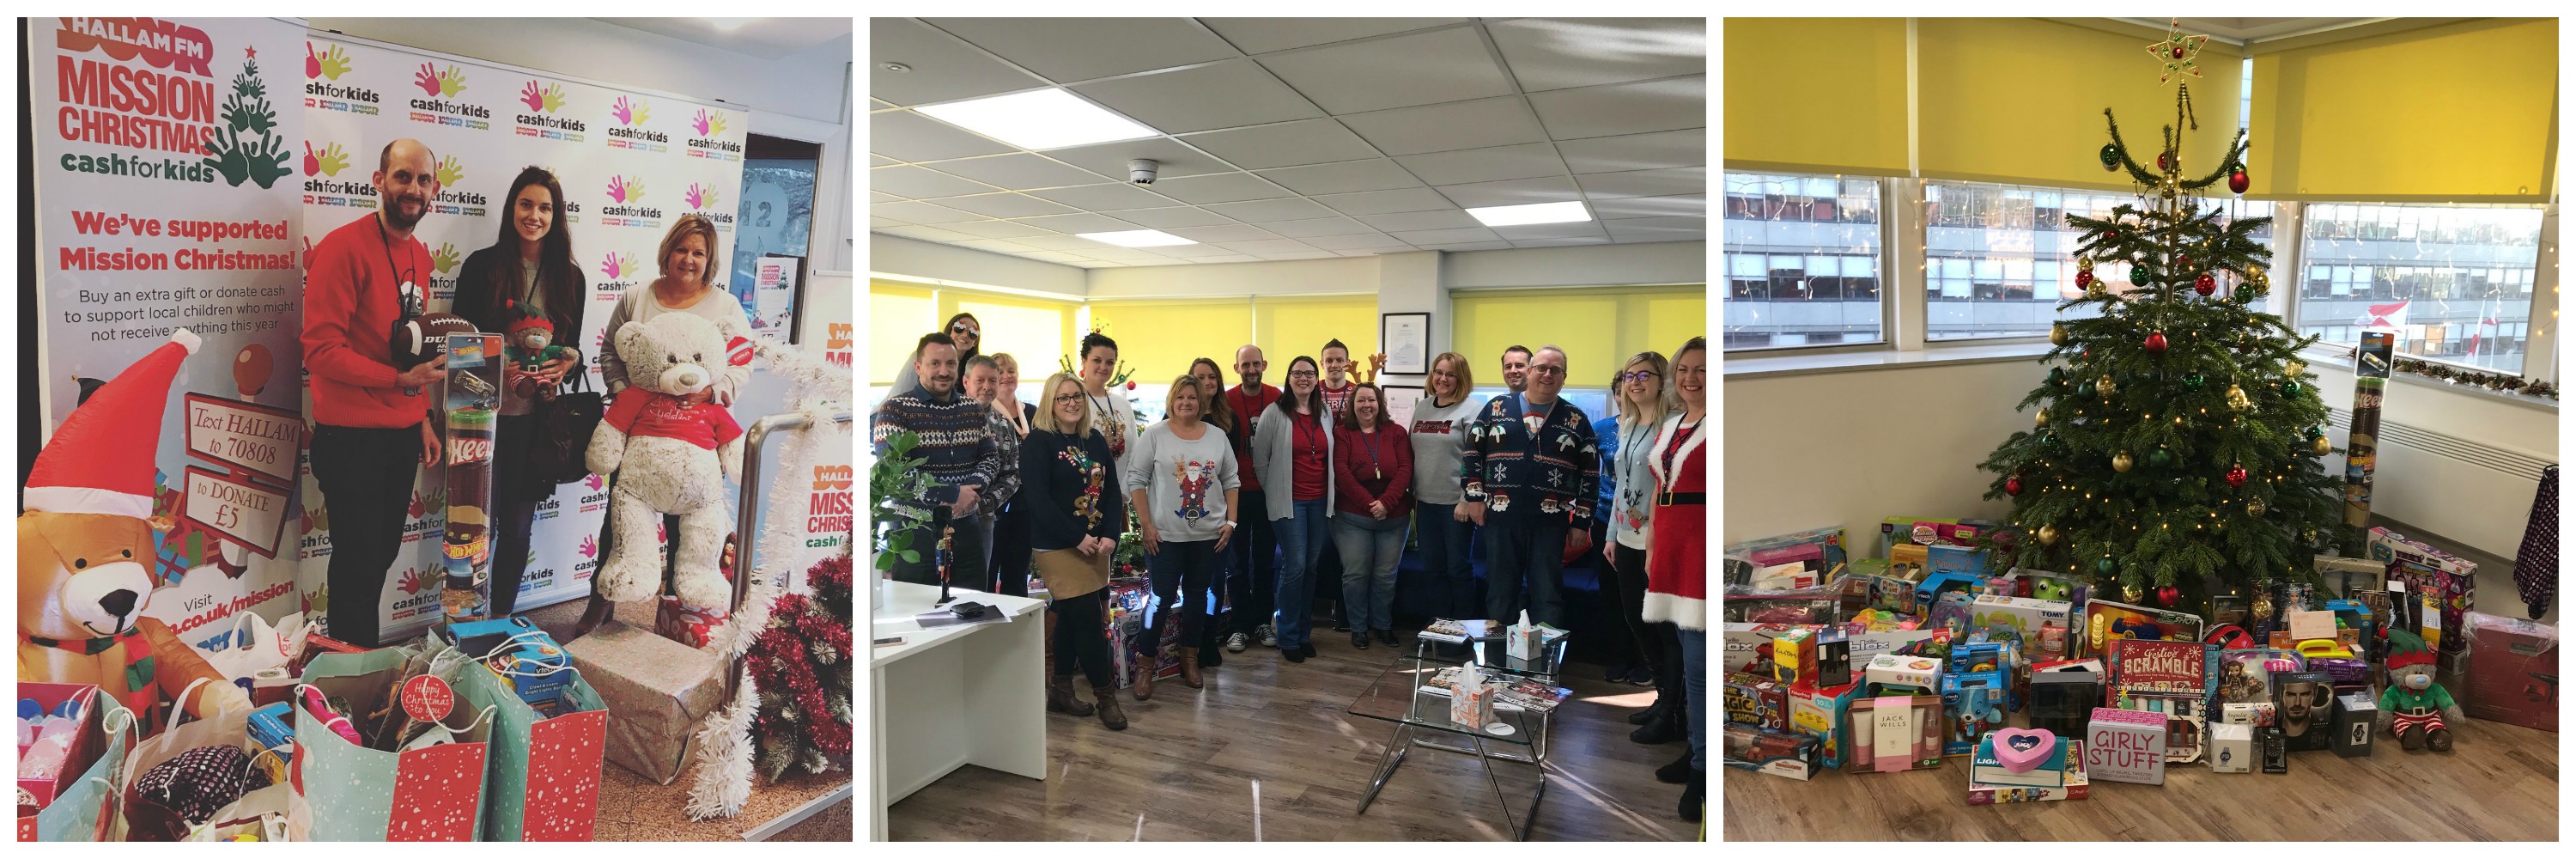 Mission Christmas Save the Children Christmas Jumper Day